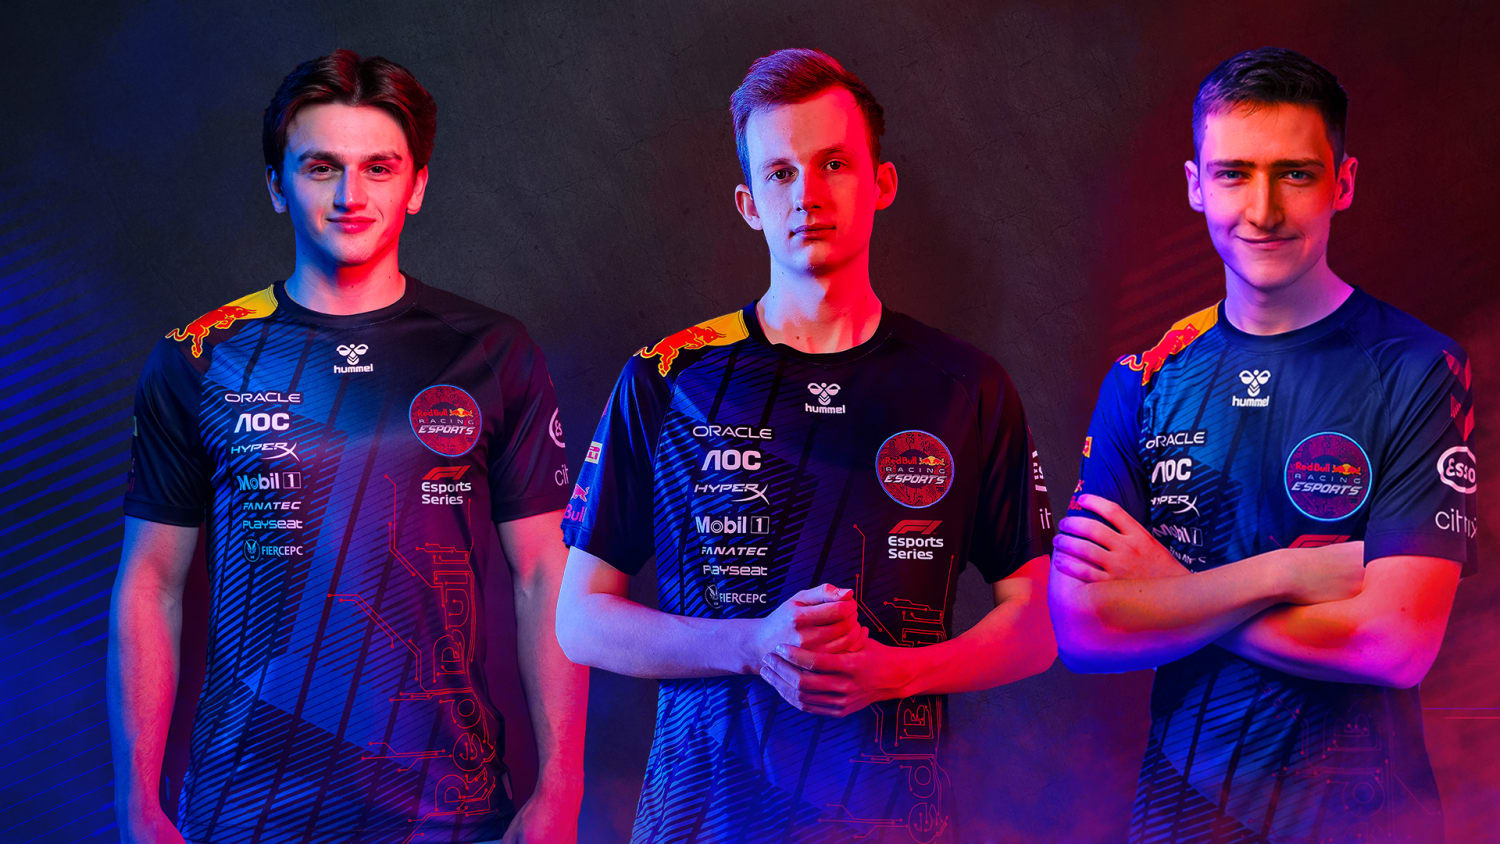 Announcing Our Line Up For F1 Esports Series 21